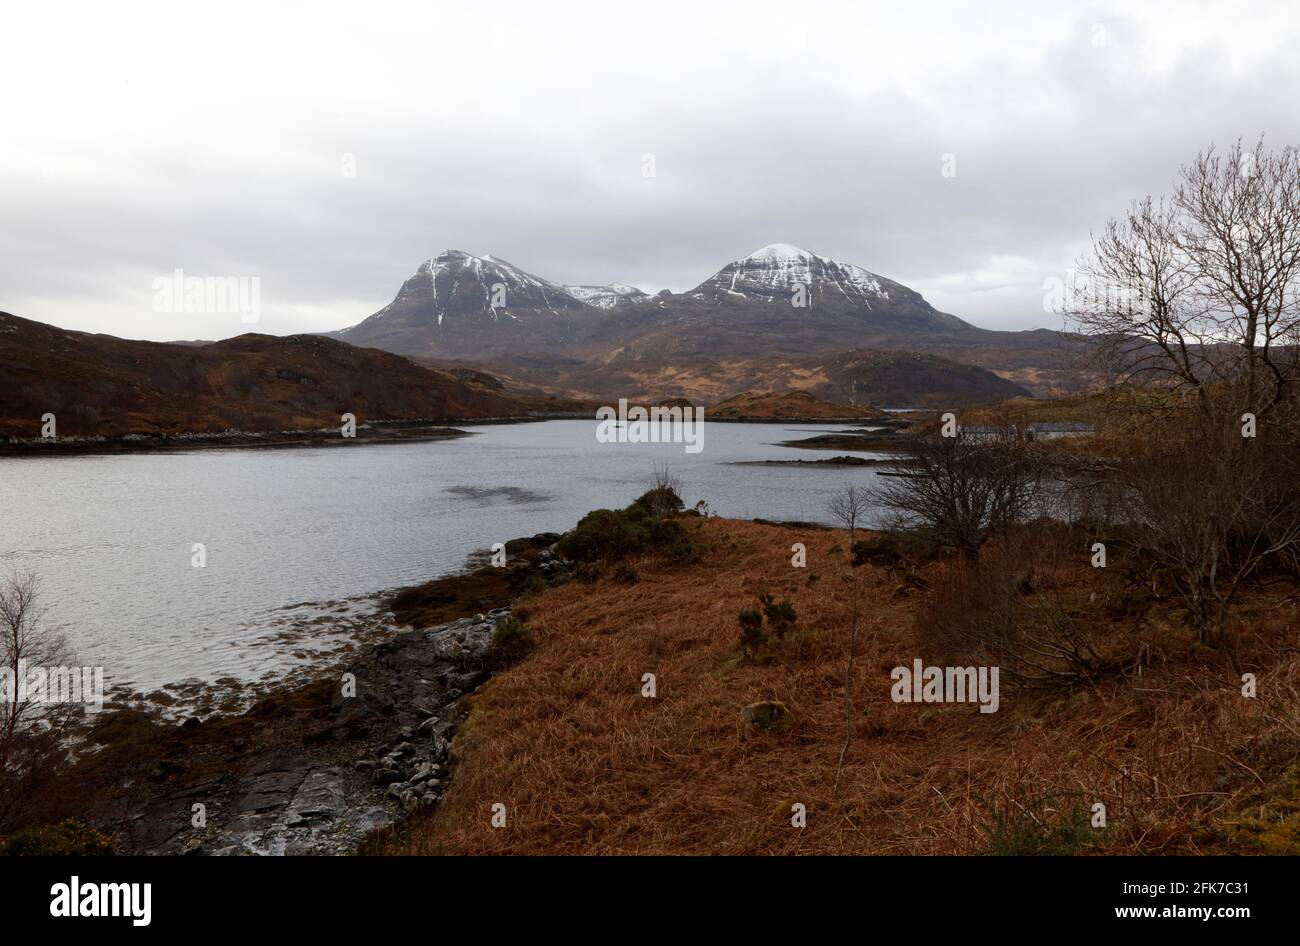 View across Loch Glendhu to the mountain of Quinag, Sutherland, Scotland, UK Stock Photo